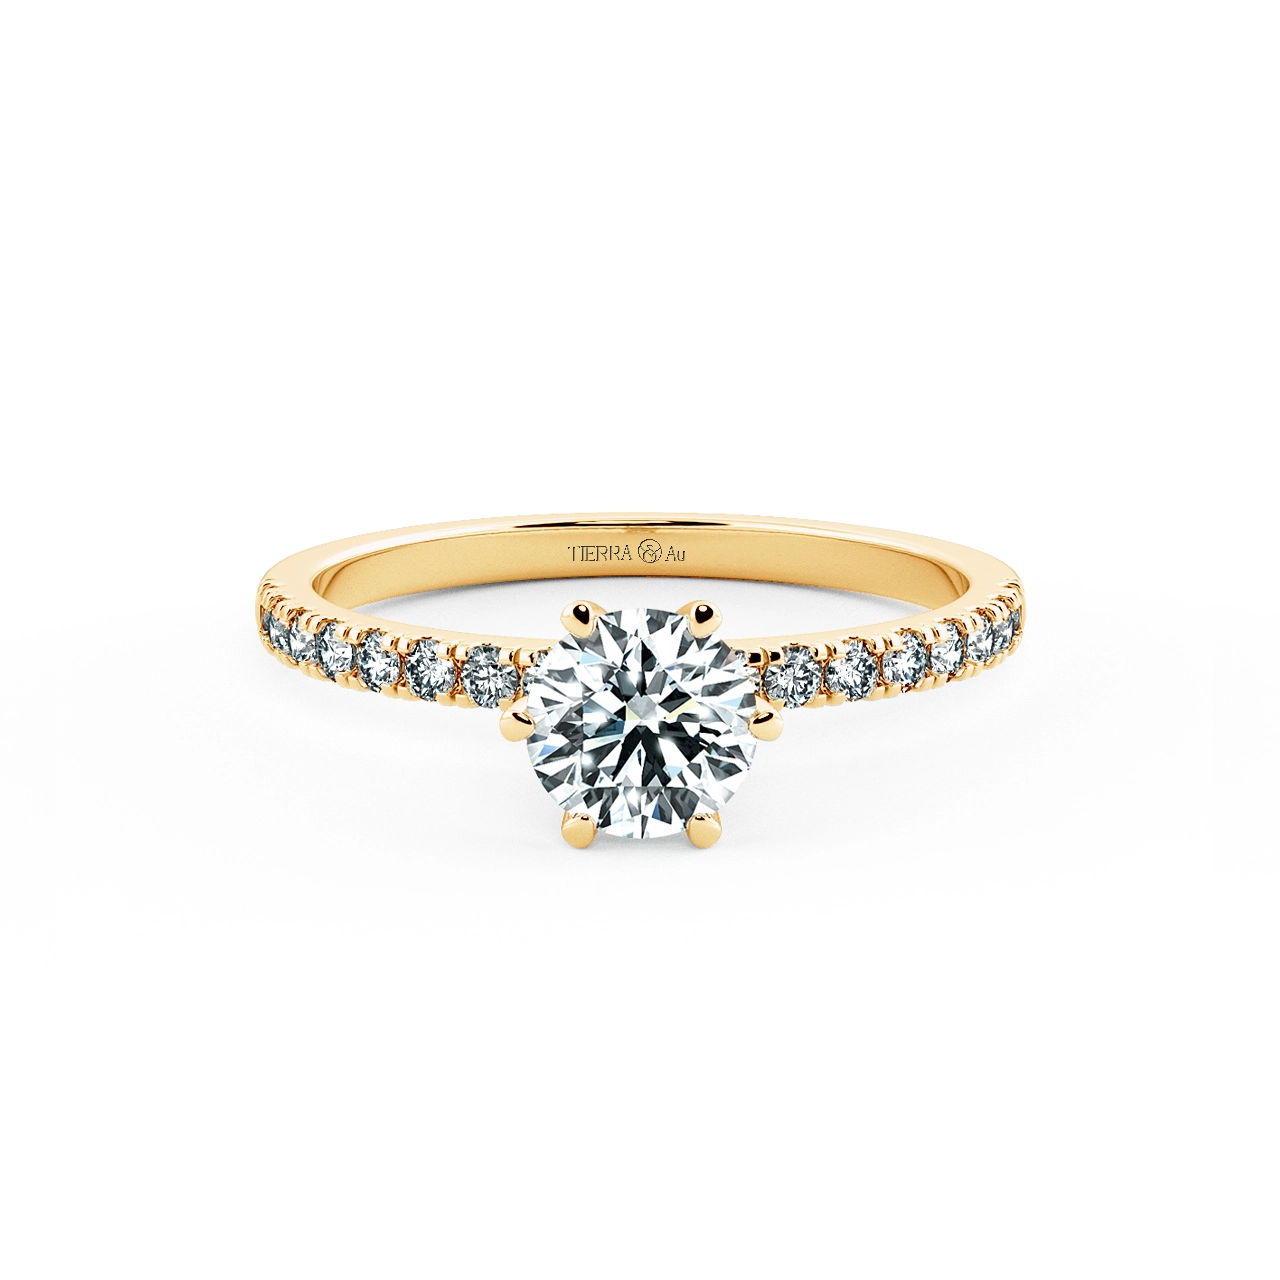 Six Prongs Solitaire Pave Engagement Ring NCH1203